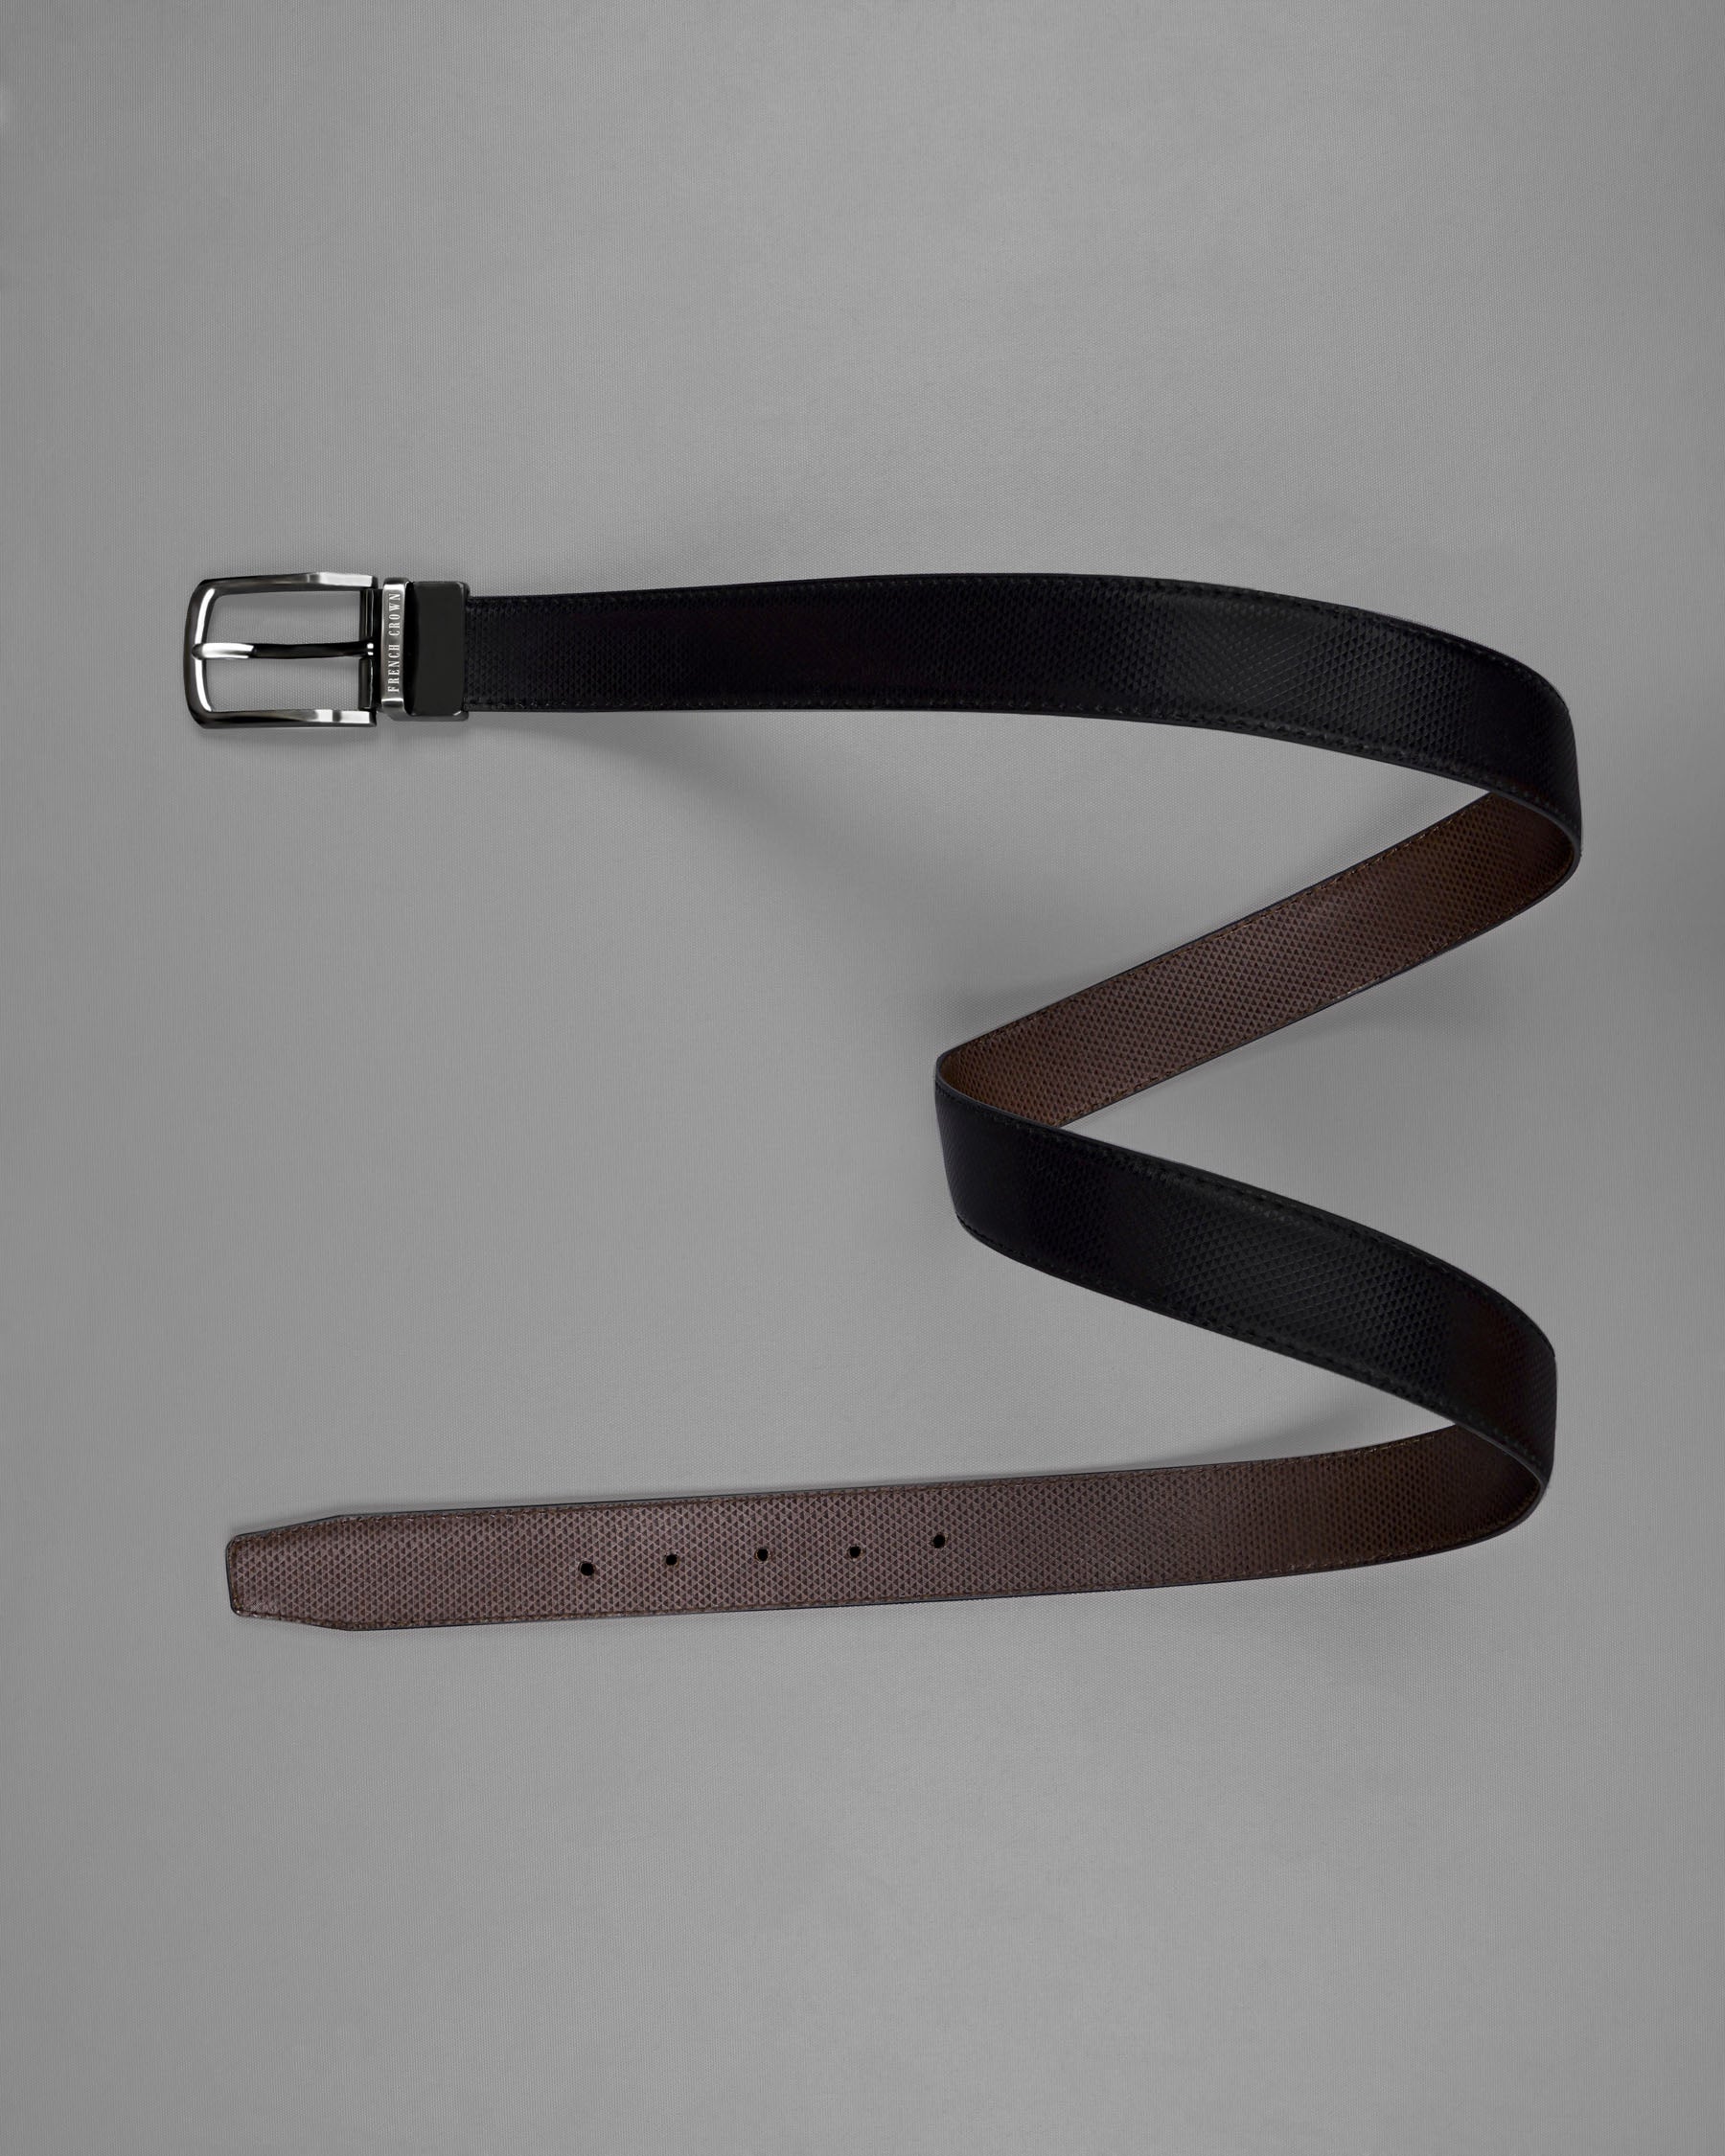 Silver Metallic Shiny Buckle with Jade Black and Brown Leather Free Handcrafted Reversible Belt BT075-28, BT075-30, BT075-32, BT075-34, BT075-36, BT075-38